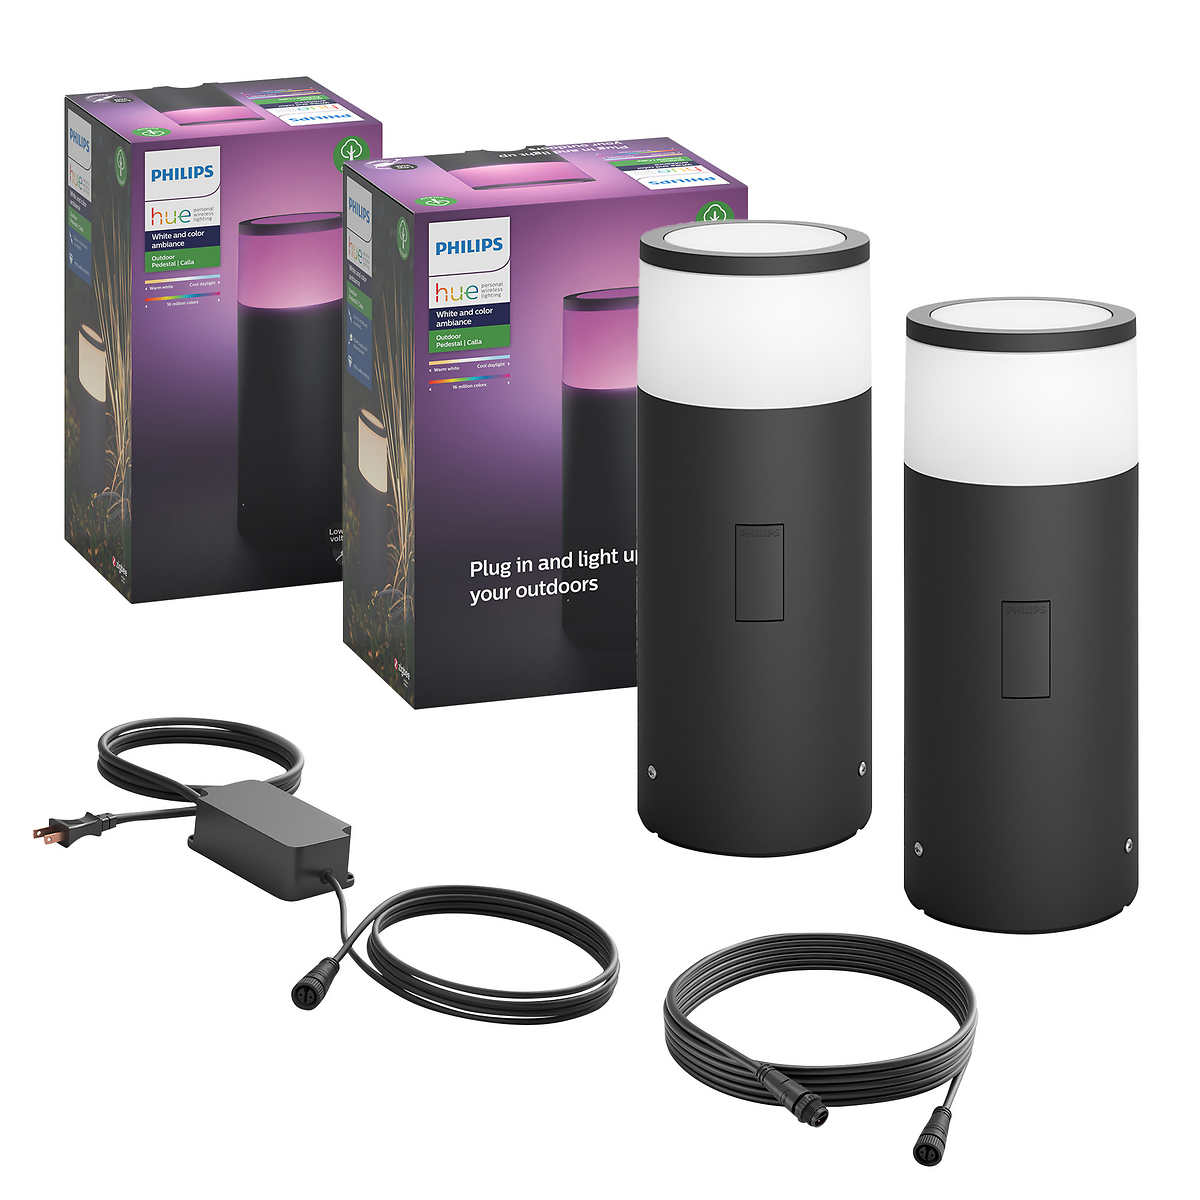 phillips hue Personal Wireless Lighting White And Color Outdoor Lantern 